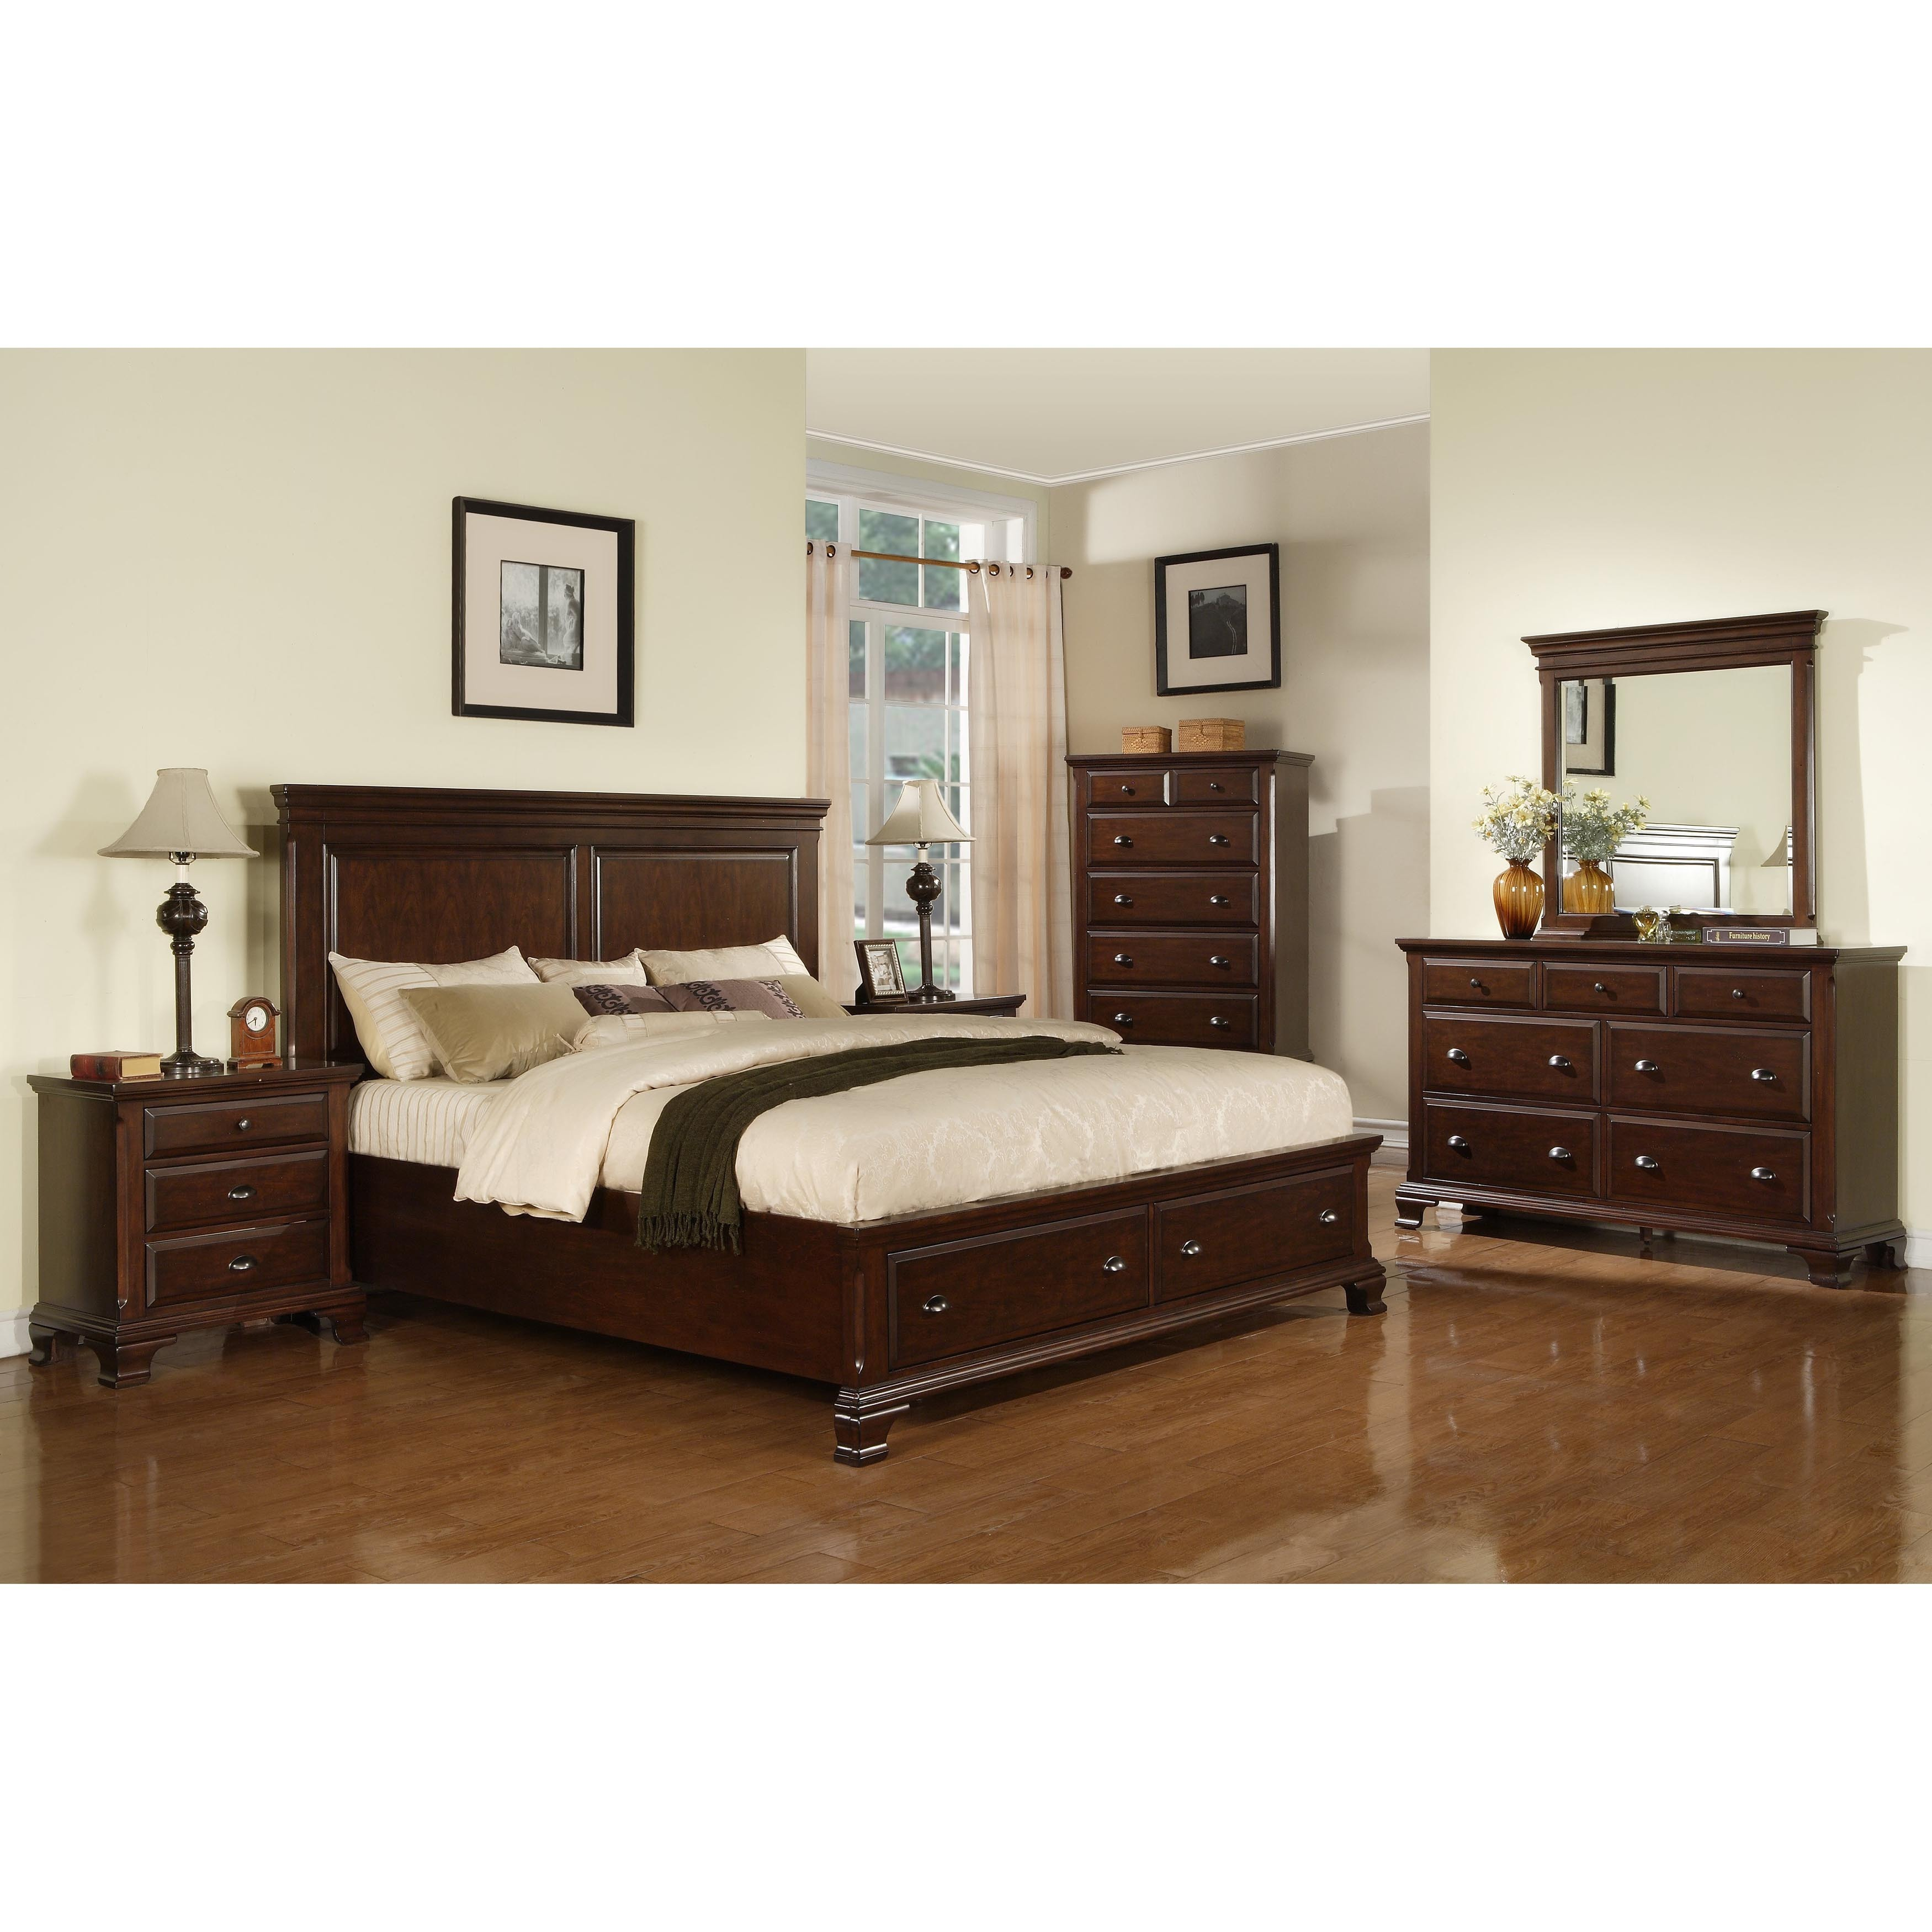 Picket House Furnishings Brinley Cherry Queen Storage 4pc Bedroom Set intended for dimensions 3500 X 3500